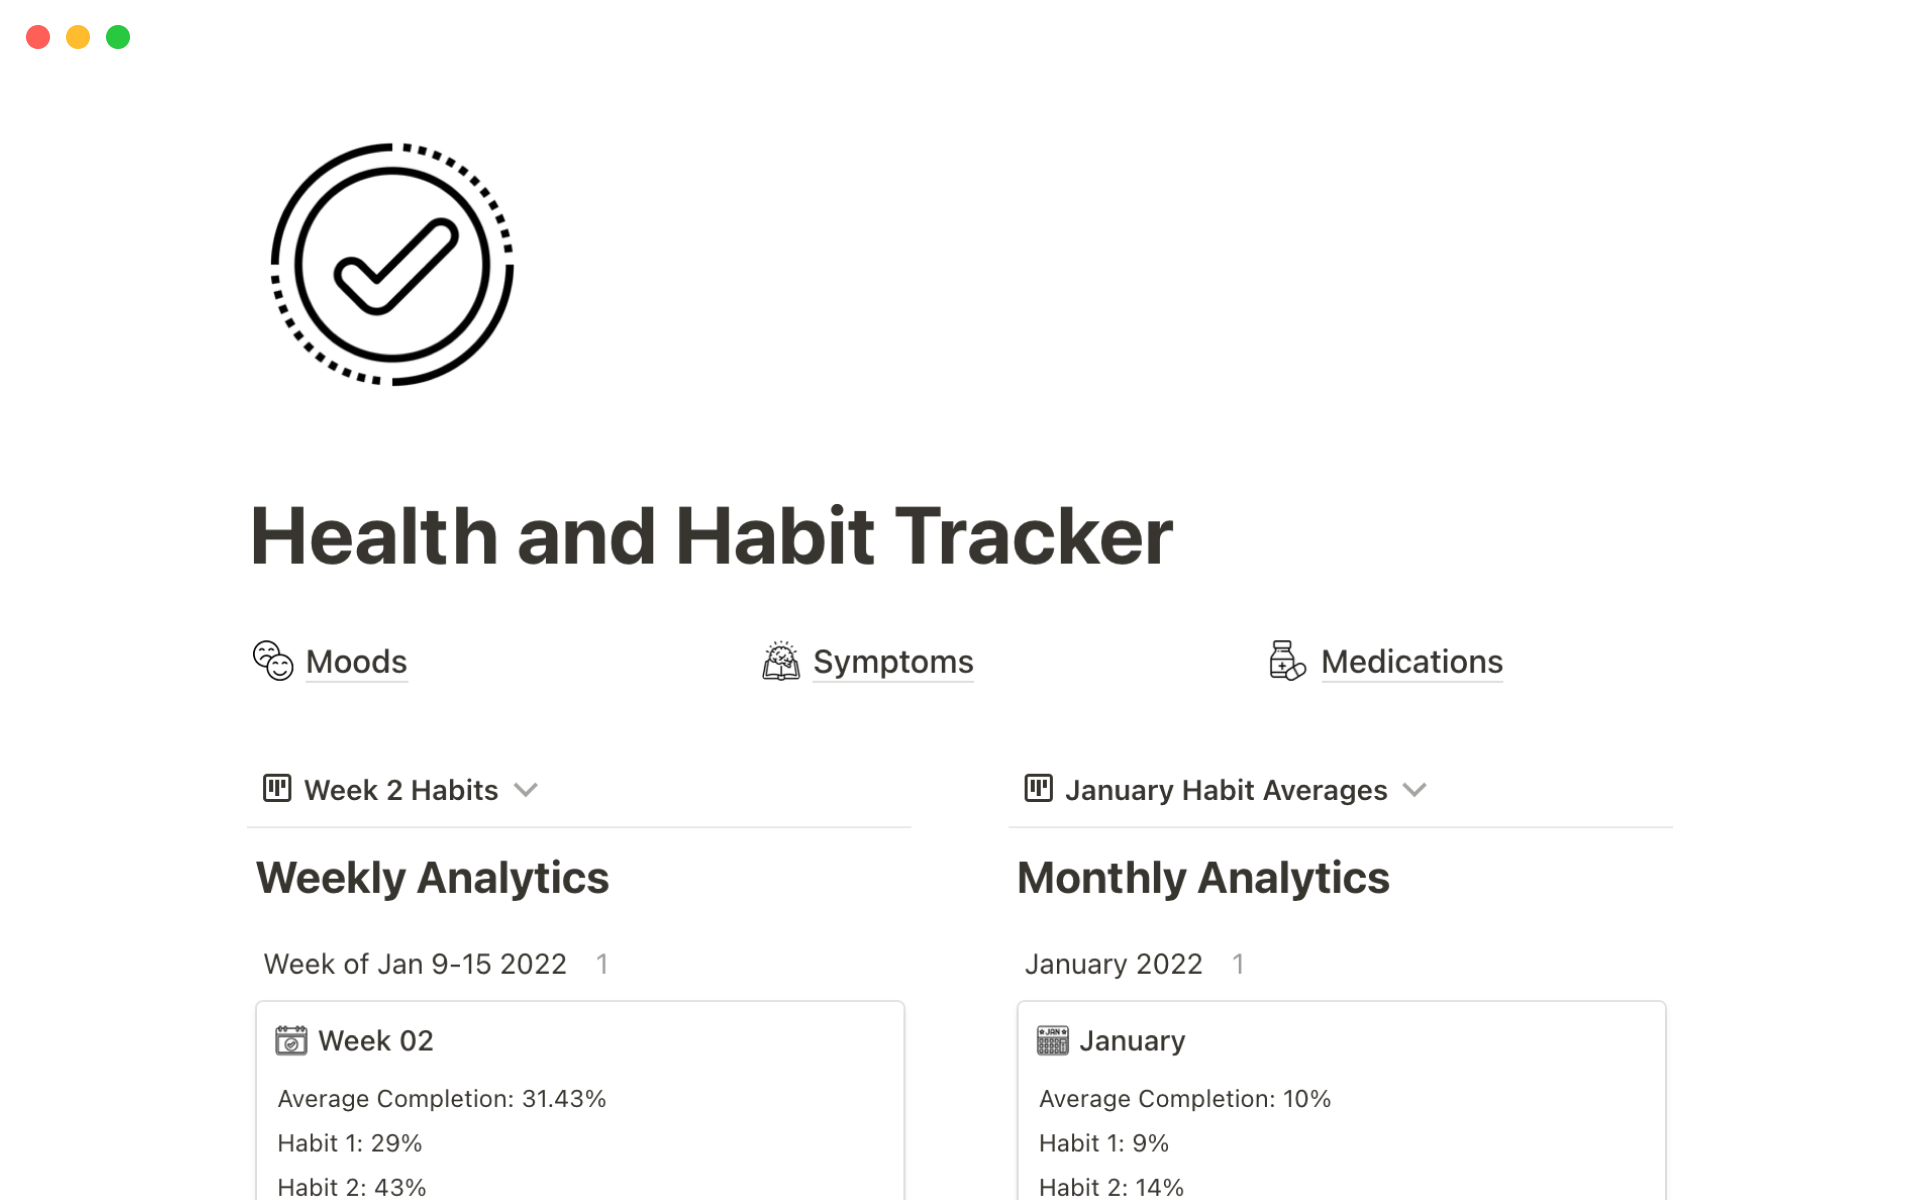 This template will help motivate you to keep your habits while providing helpful statistics.